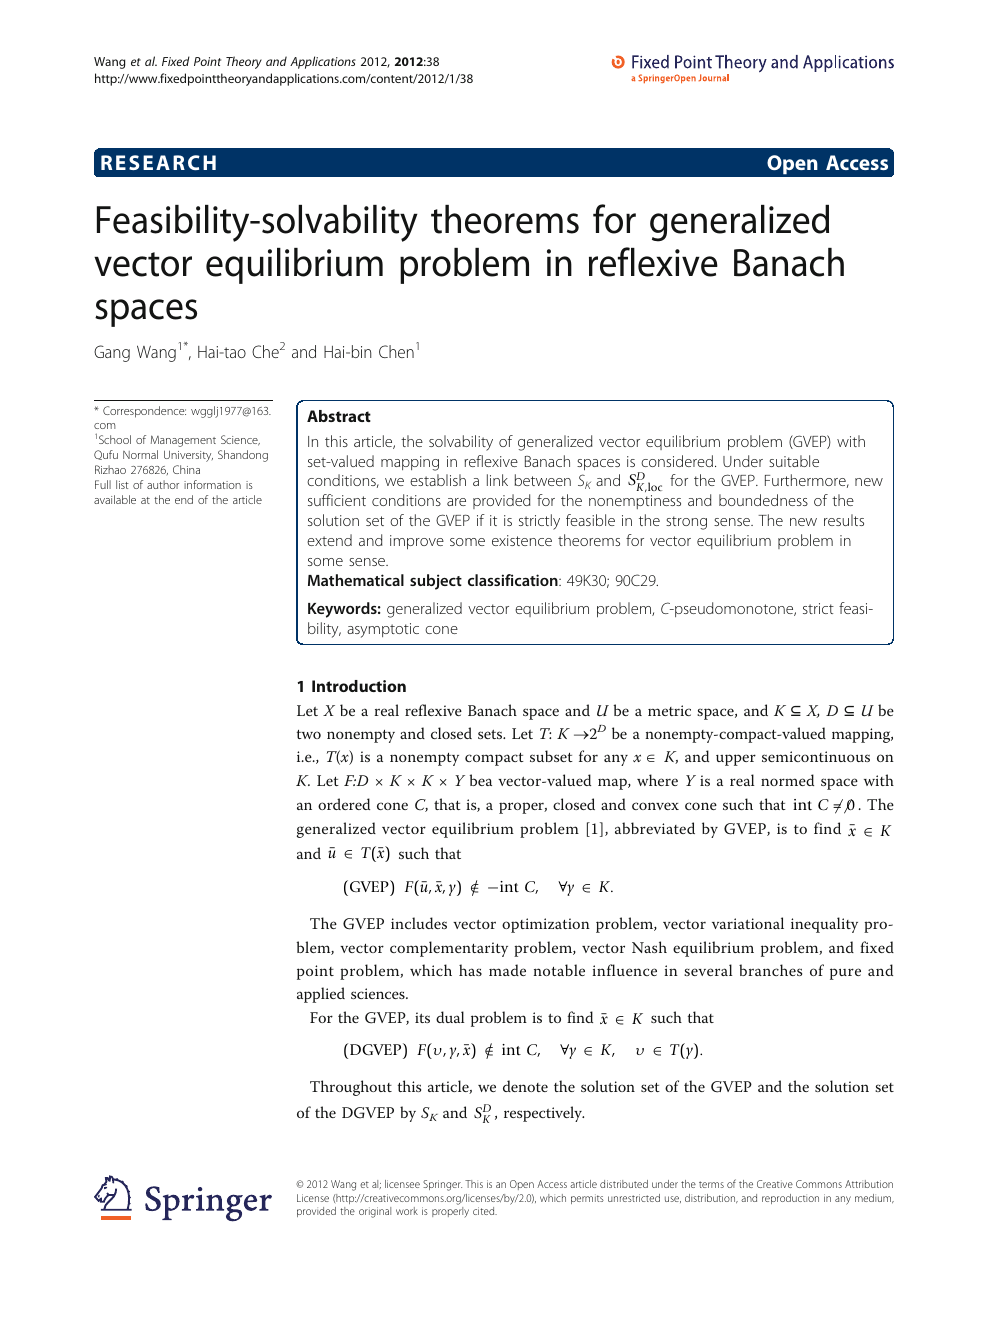 Feasibility Solvbility Theorems For Generalized Vector Equilibrium Problem In Reflexive Banach Spaces Topic Of Research Paper In Mathematics Download Scholarly Article Pdf And Read For Free On Cyberleninka Open Science Hub